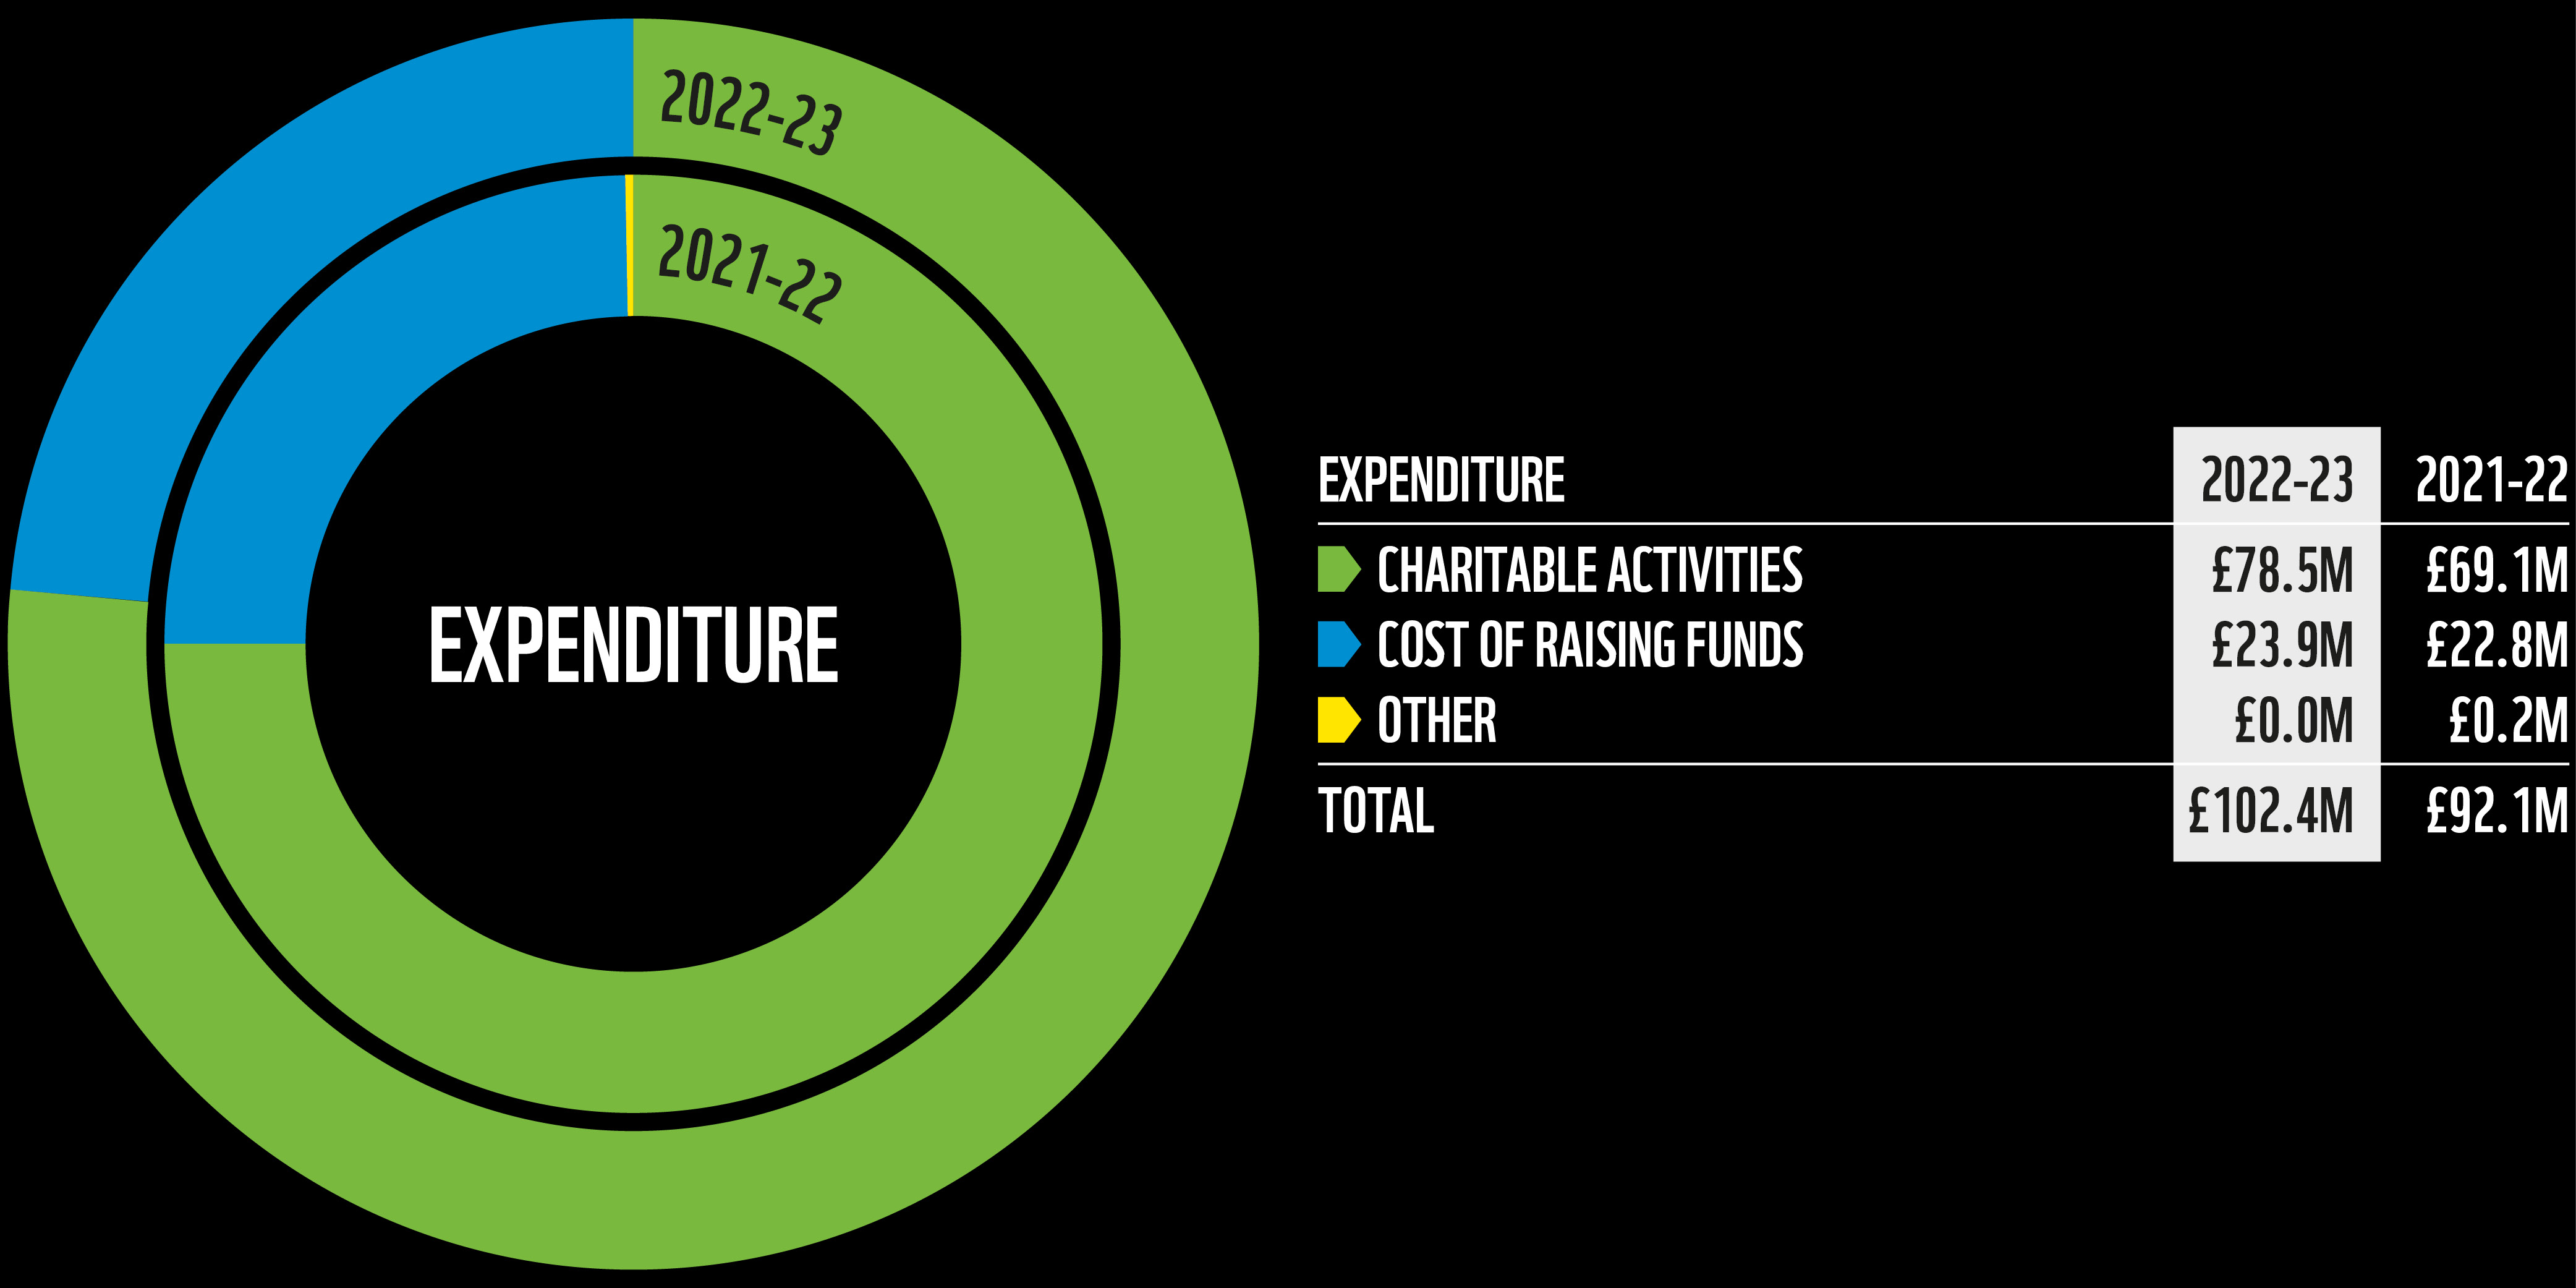 Pie chart of WWF-UKs expenditure 2022-23. Charitable activities £78.5m, Cost of raising funds £23.9m, Other £0.0m, Total £102.4m.